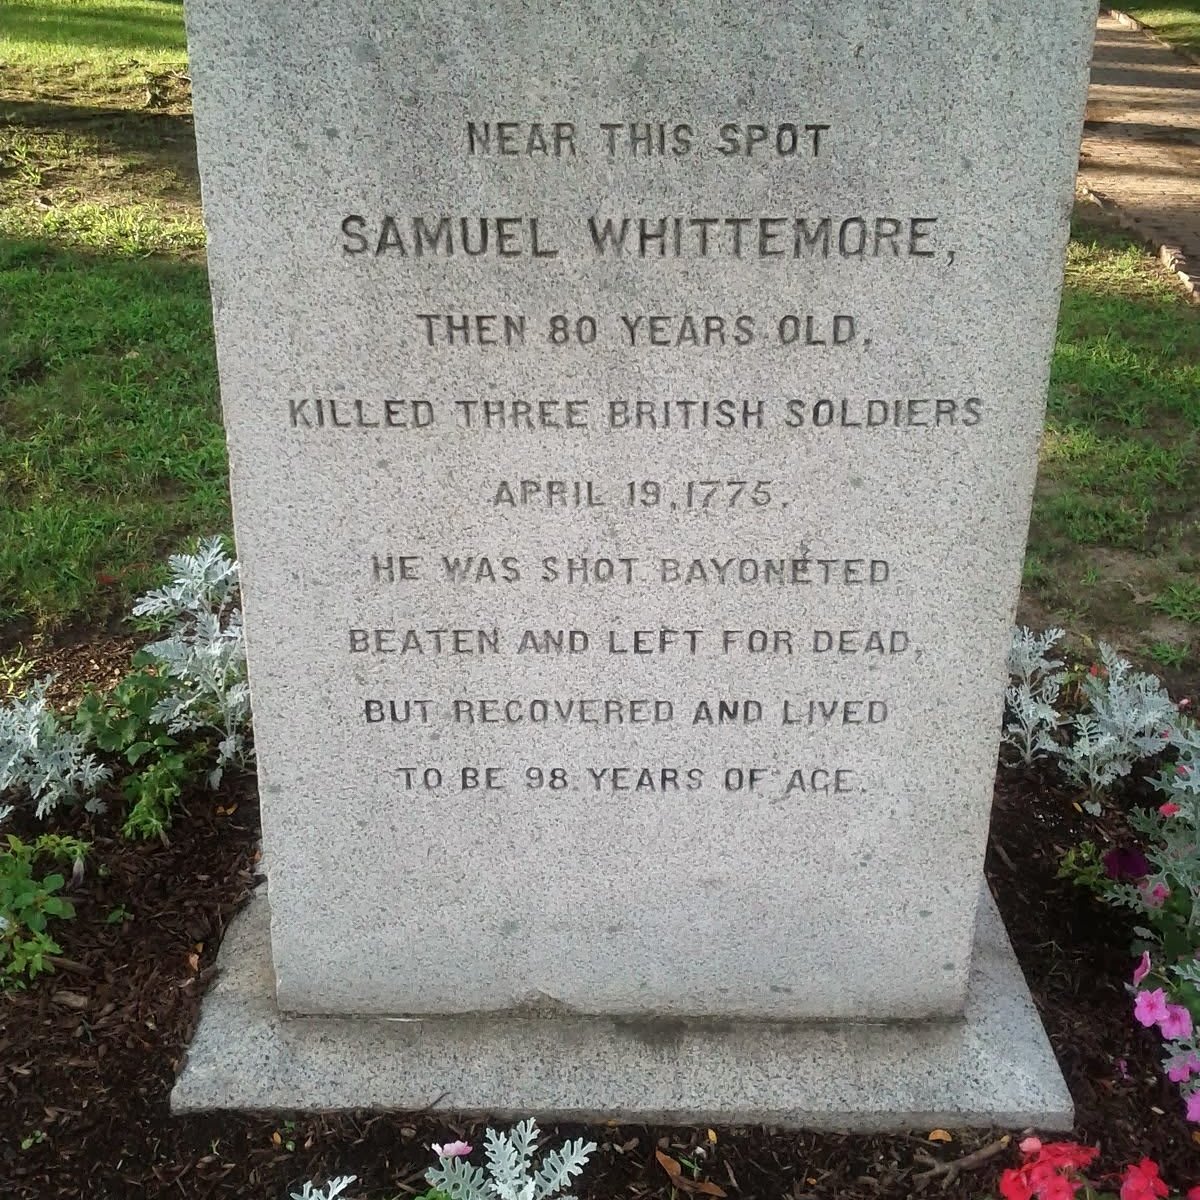 At nearly 80 years old, Samuel Whittemore was the oldest combatant of the American Revolutionary War. After ambushing British troops he was shot in the face & bayonetted several times. He was later found attempting to reload his rifle to continue the fight. He survived and lived to the age of 96